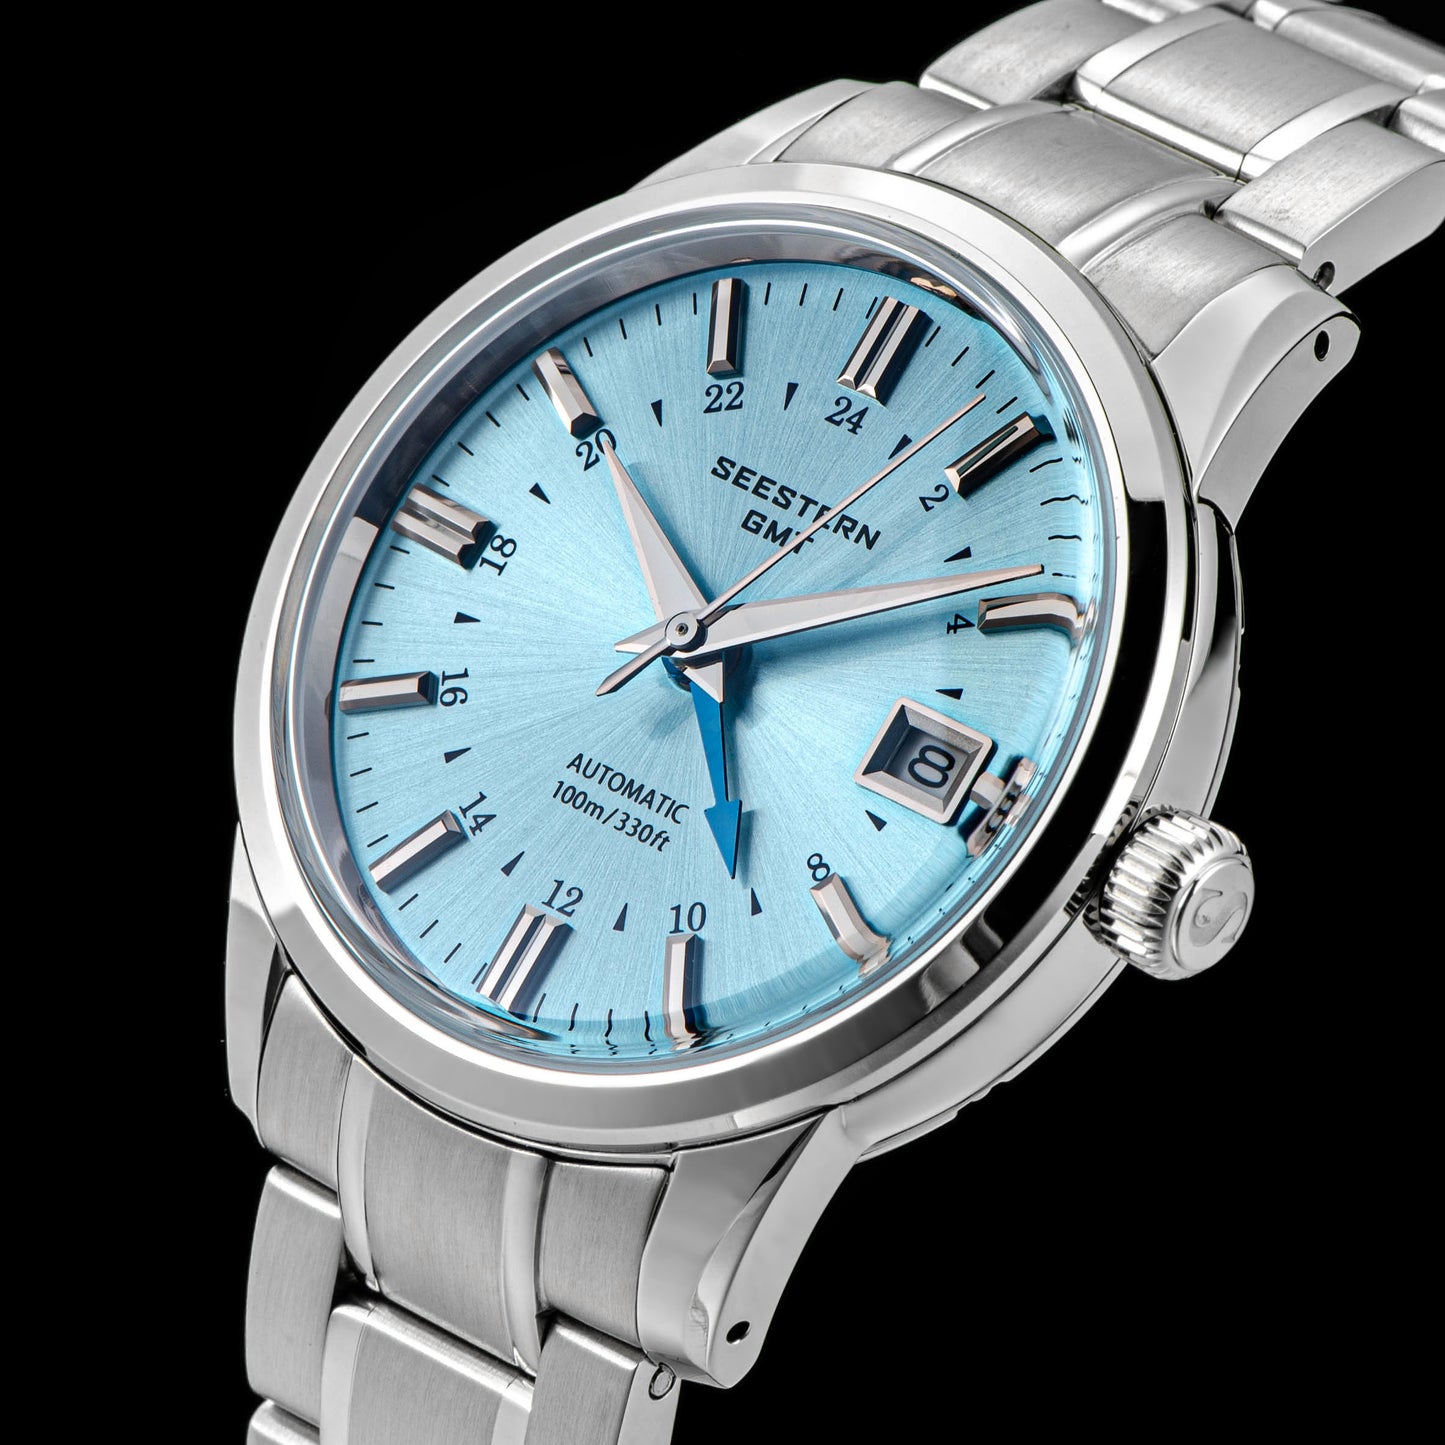 Seestern S446 GMT Watch Ice Blue Dial (Seiko NH34 GMT movement)